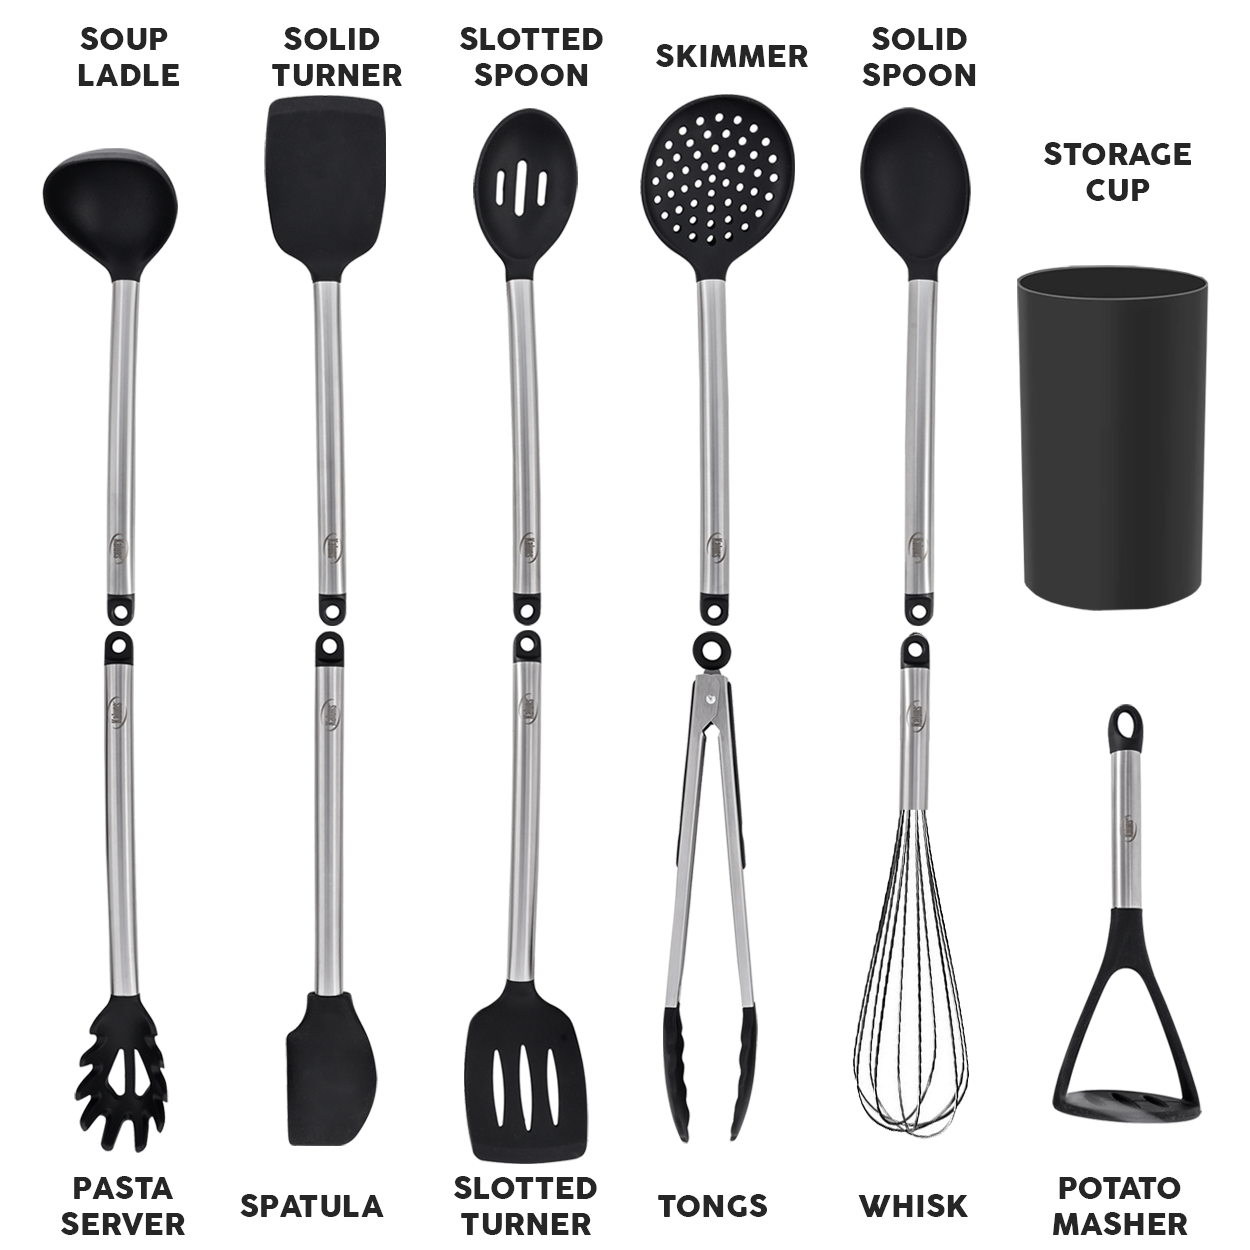 LIANYU 12-Piece Silicone Kitchen Cooking Utensils Set with Holder, Kitchen  Tools Include Slotted Spa…See more LIANYU 12-Piece Silicone Kitchen Cooking